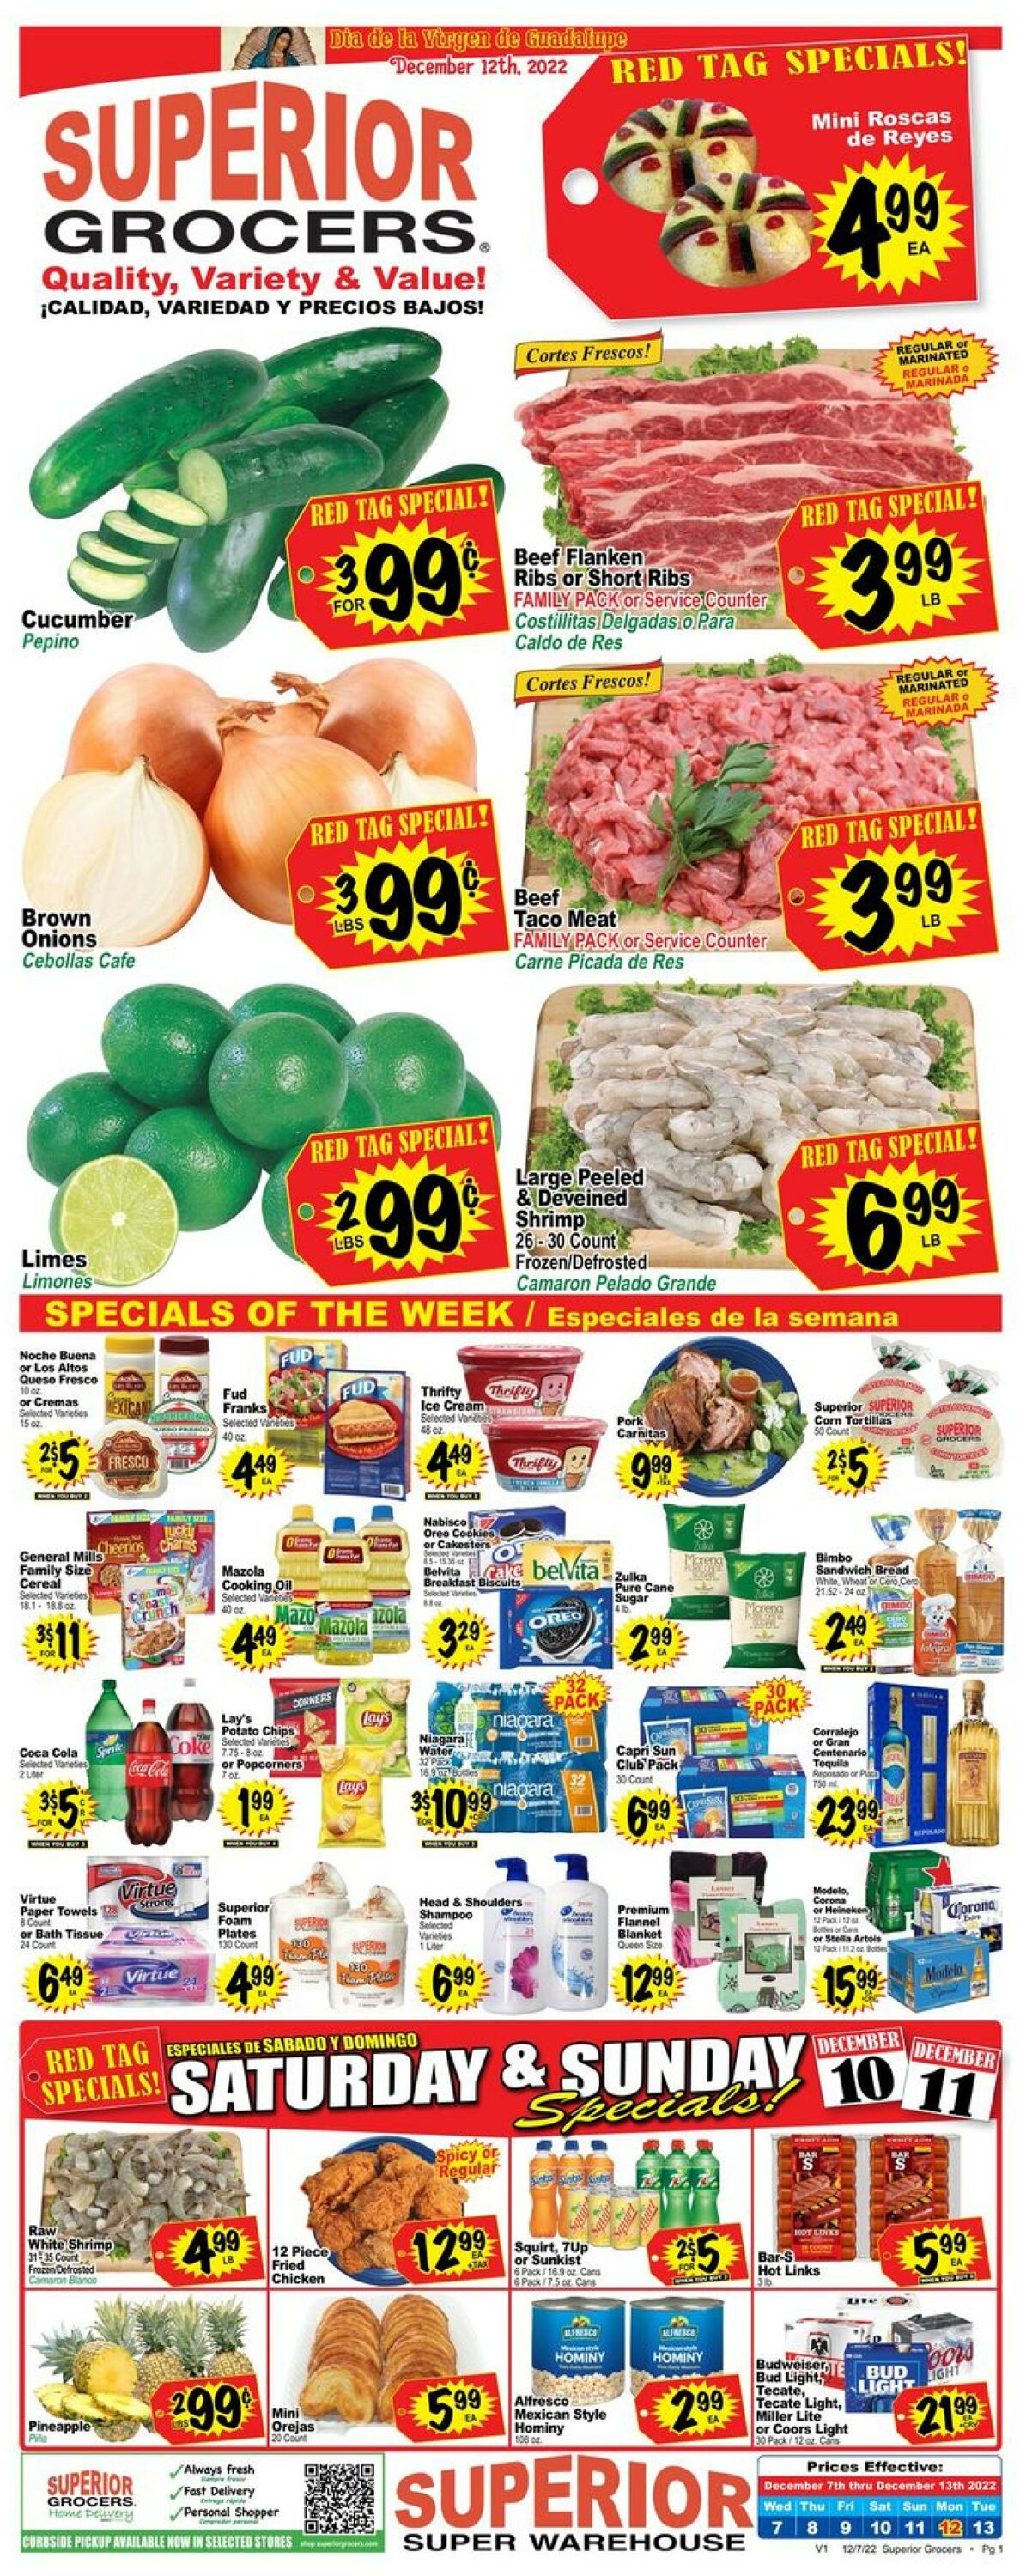 Superior Grocers Current weekly ad 12/07 - 12/13/2022